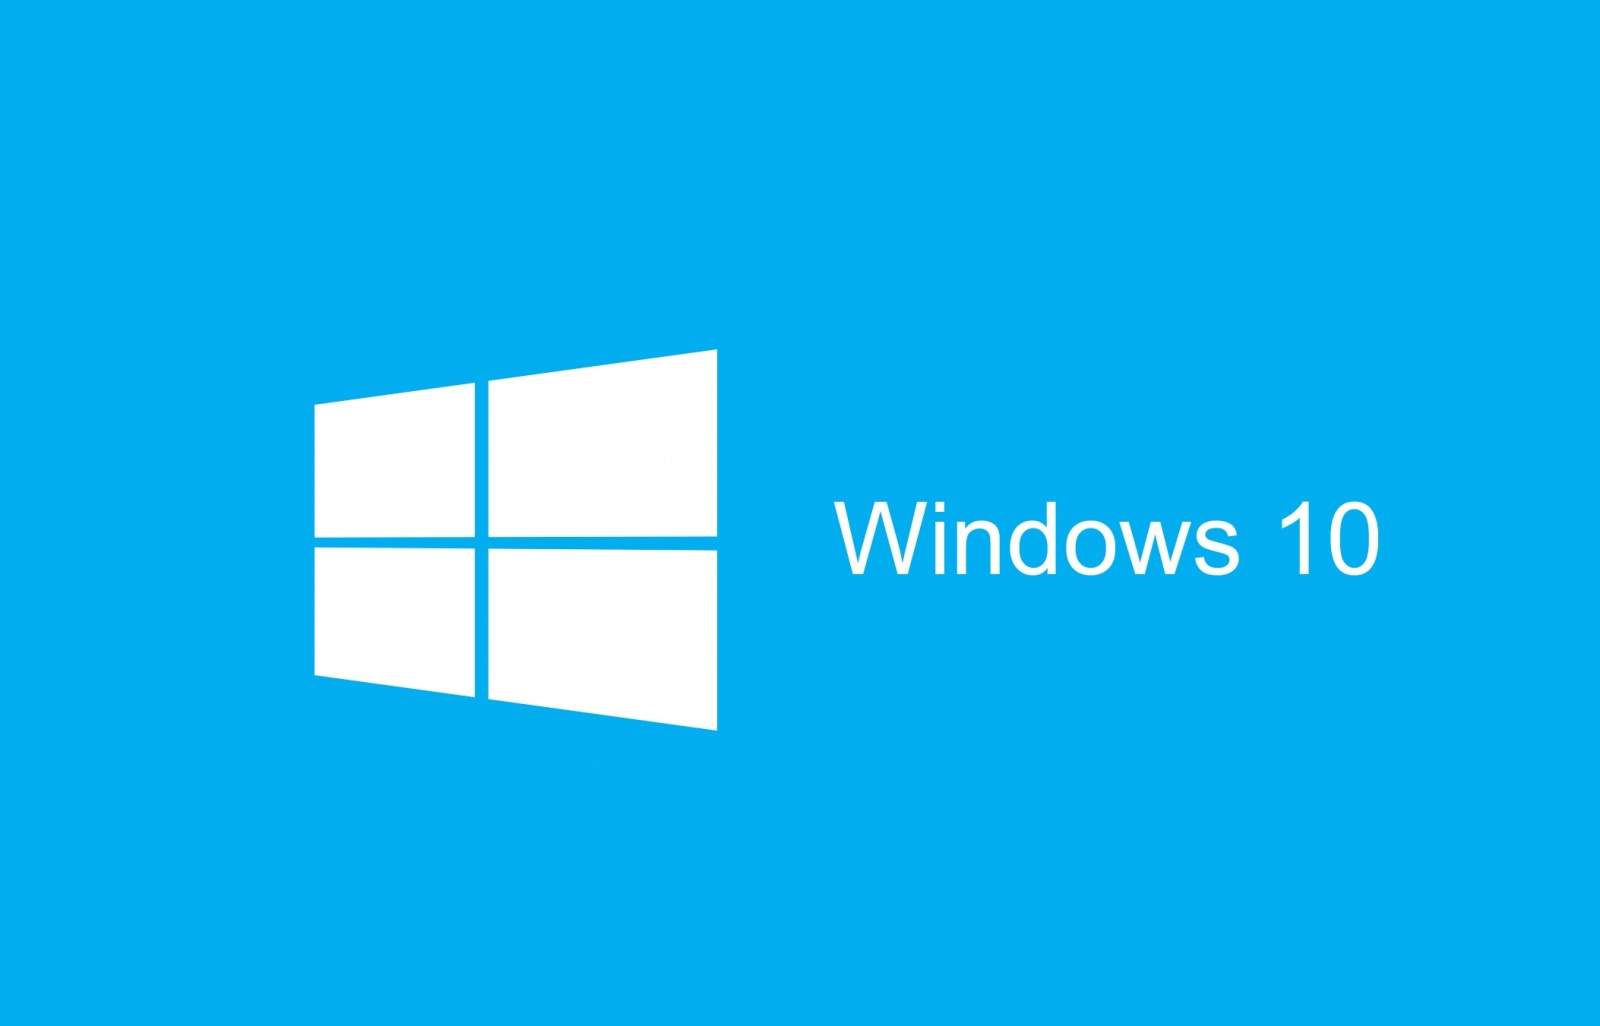 Boot Camp now supports Windows 10.